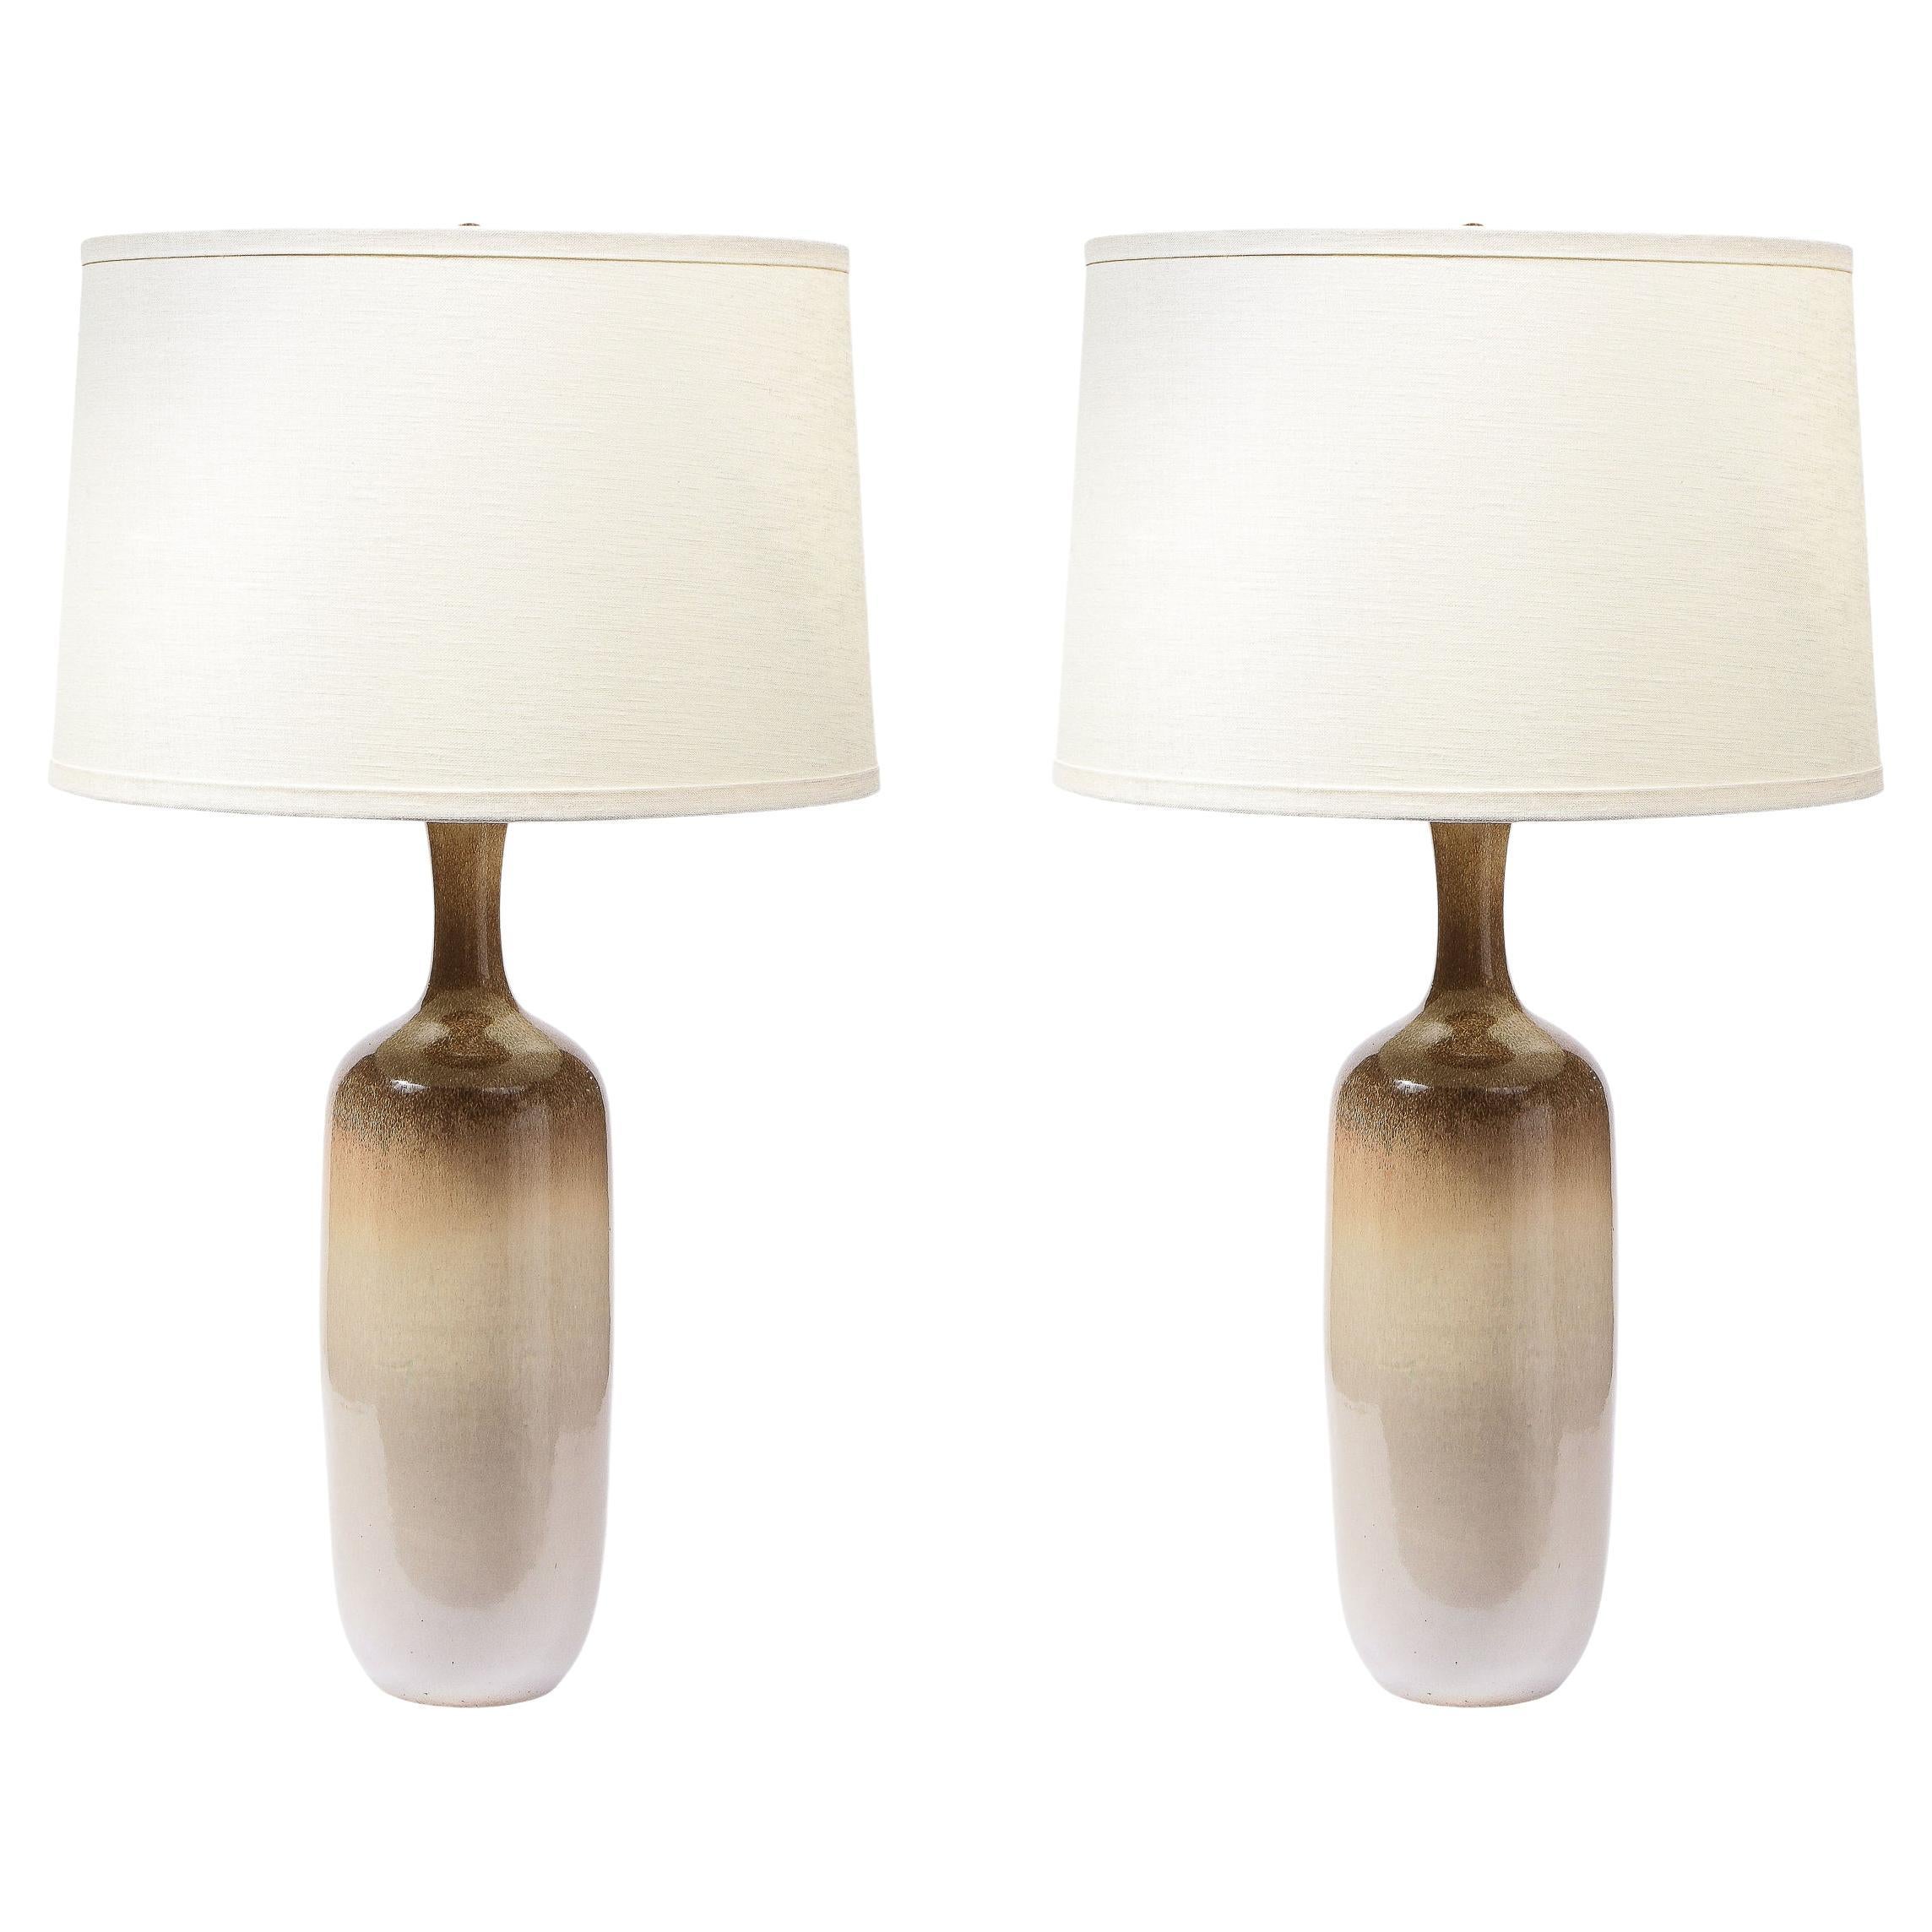 Pair of Ceramic Hand Painted Gradient Table Lamps by Design Techniques 